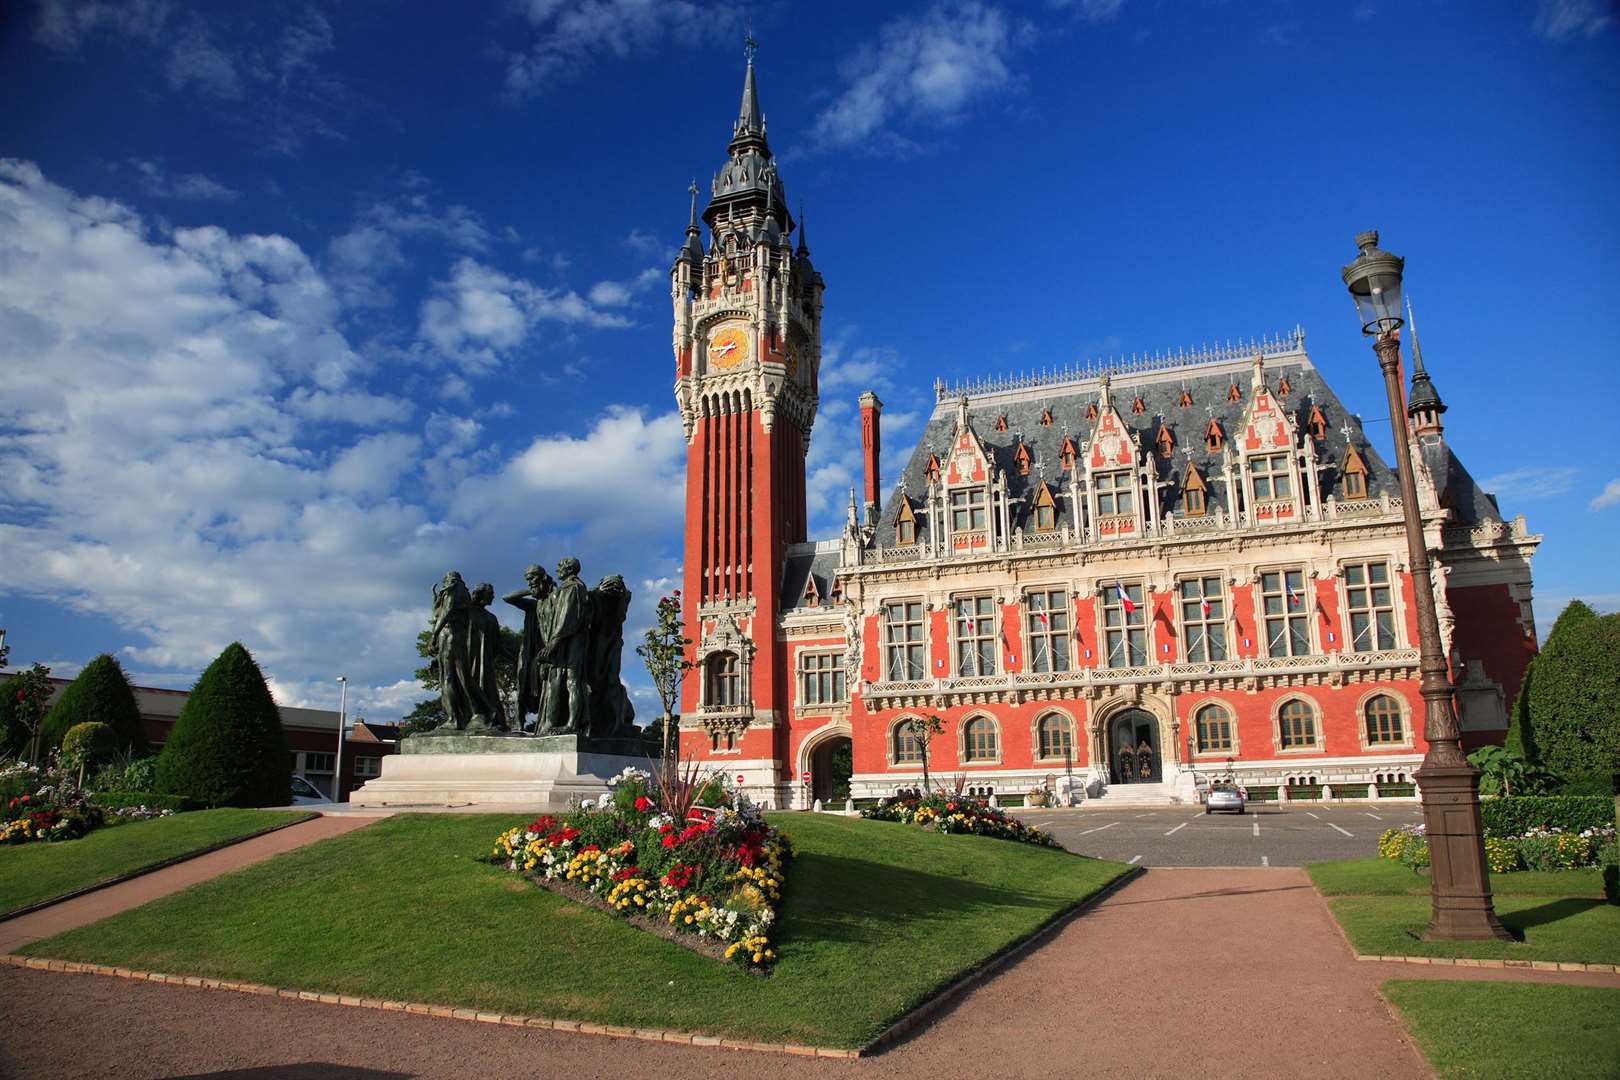 One of Calais' finest landmarks is the Town Hall whose towering belfry can be seen for miles around